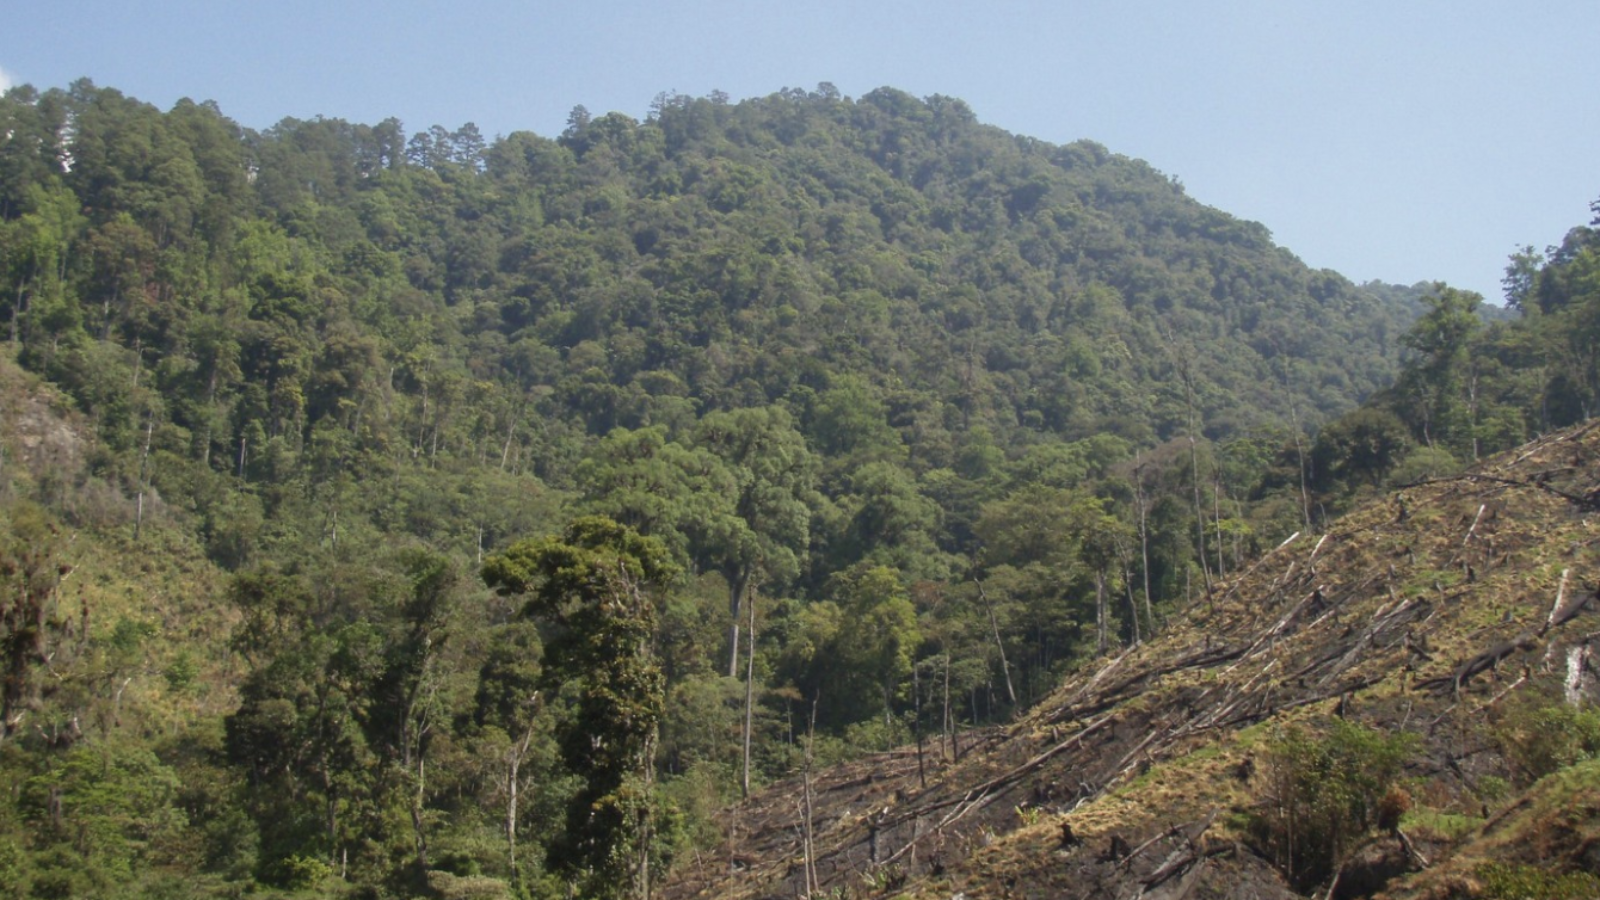 An image of a wide swathe of trees that have been cut down on the side of a mountain in Honduras.